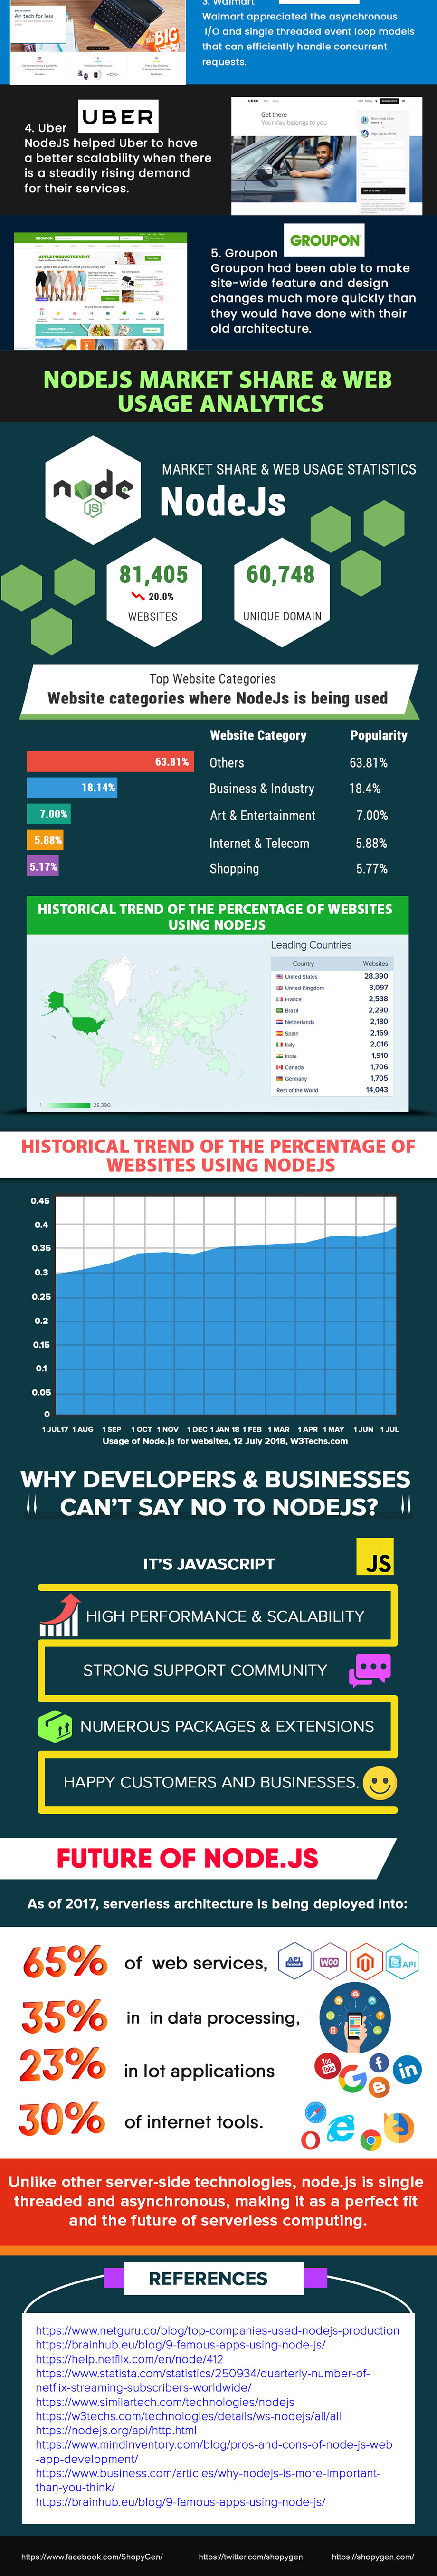 Why Node.js has been sublime for eCommerce website development & businesses - Infographic 2